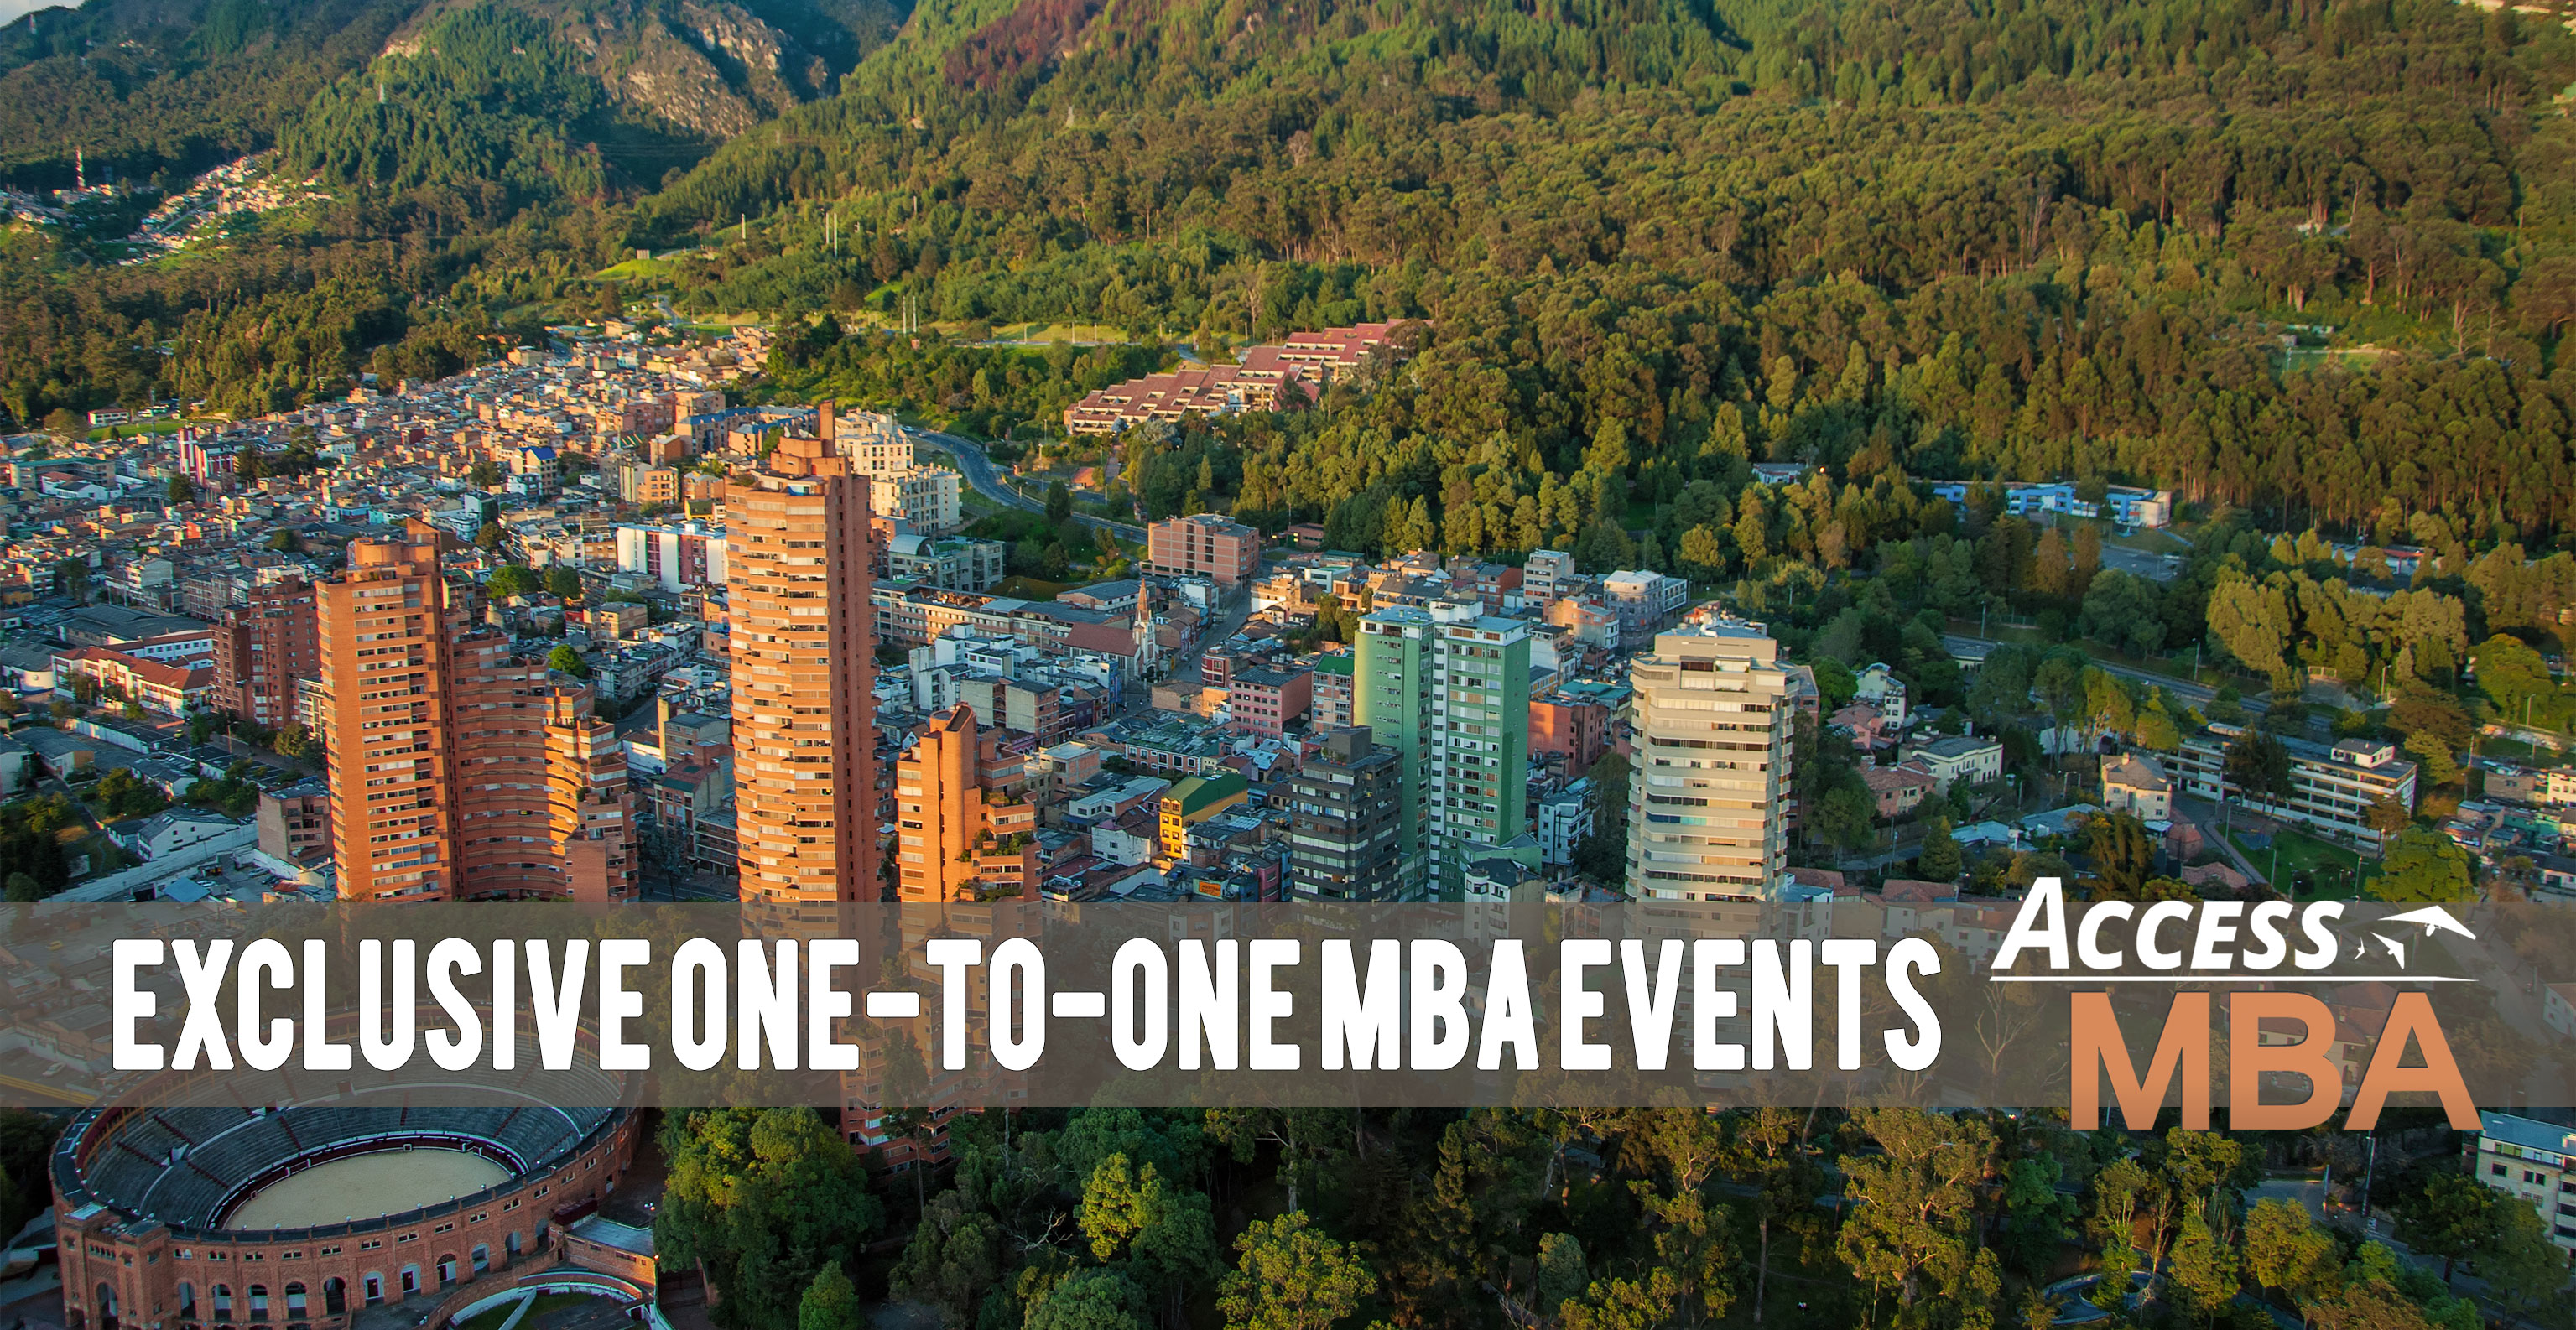 Meet the best MBA schools in Bogota on March 5th!, Bogota, Colombia